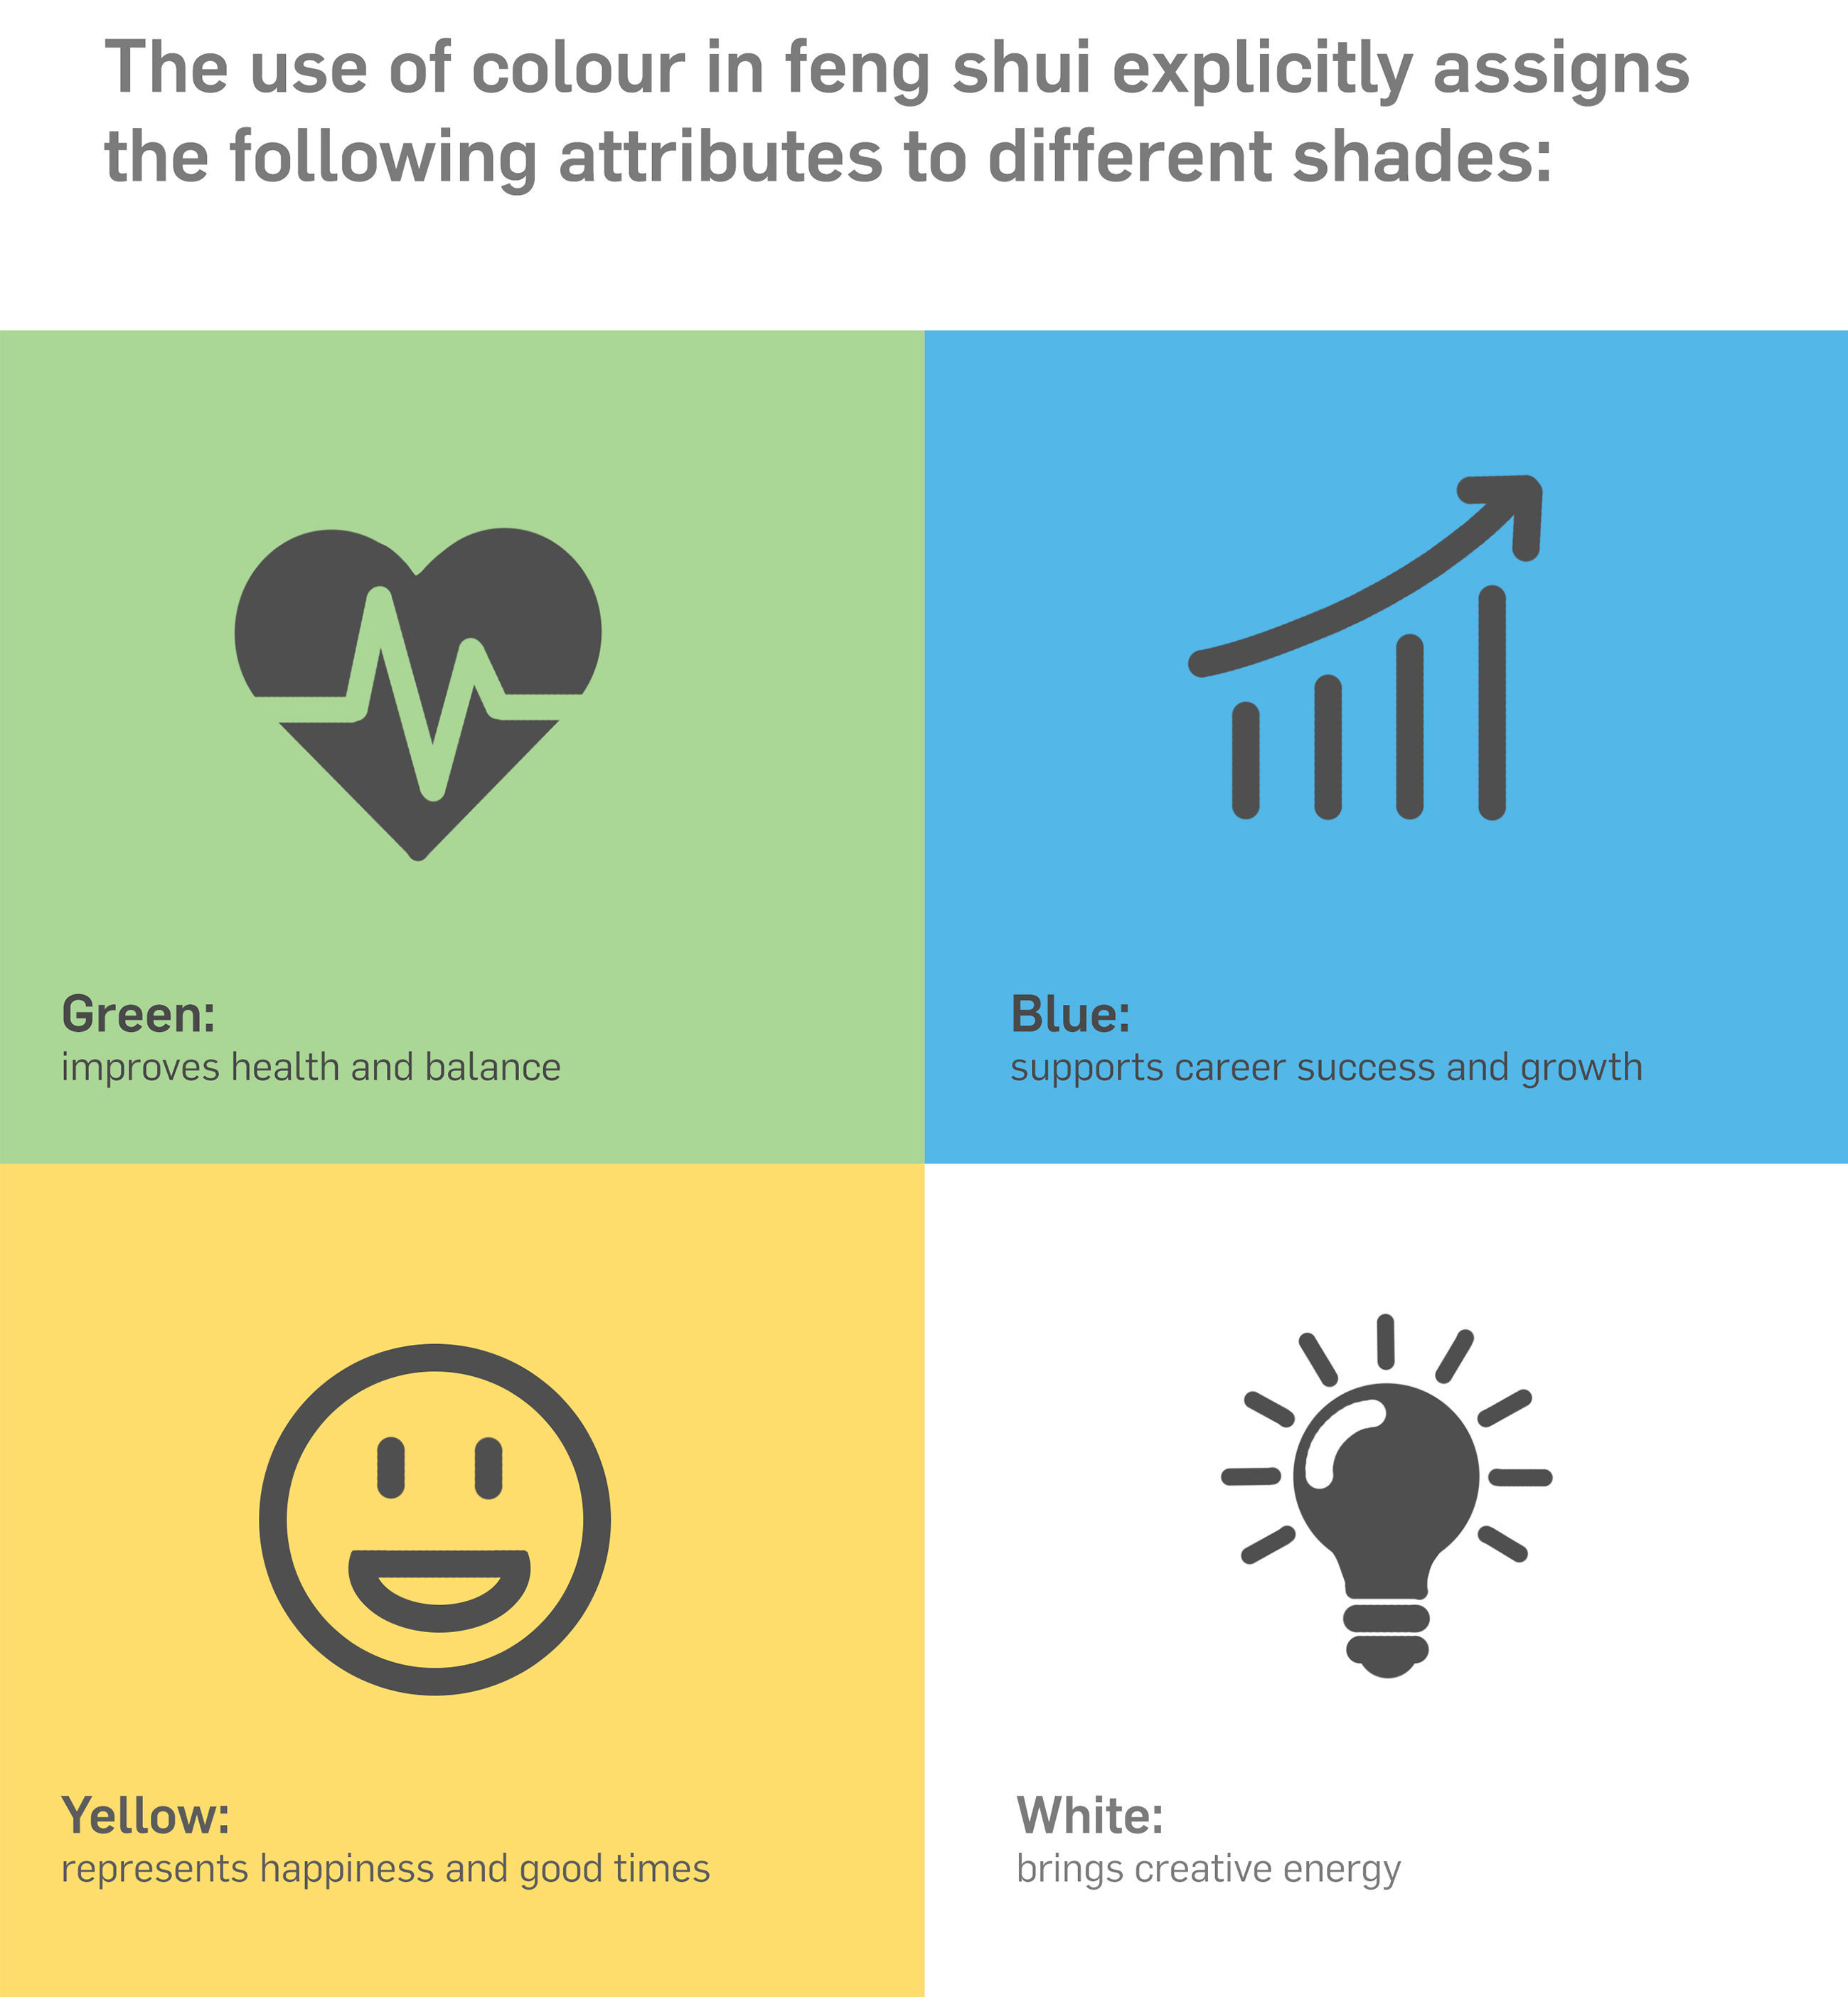 Infographic: Your Guide to Feng Shui Colors